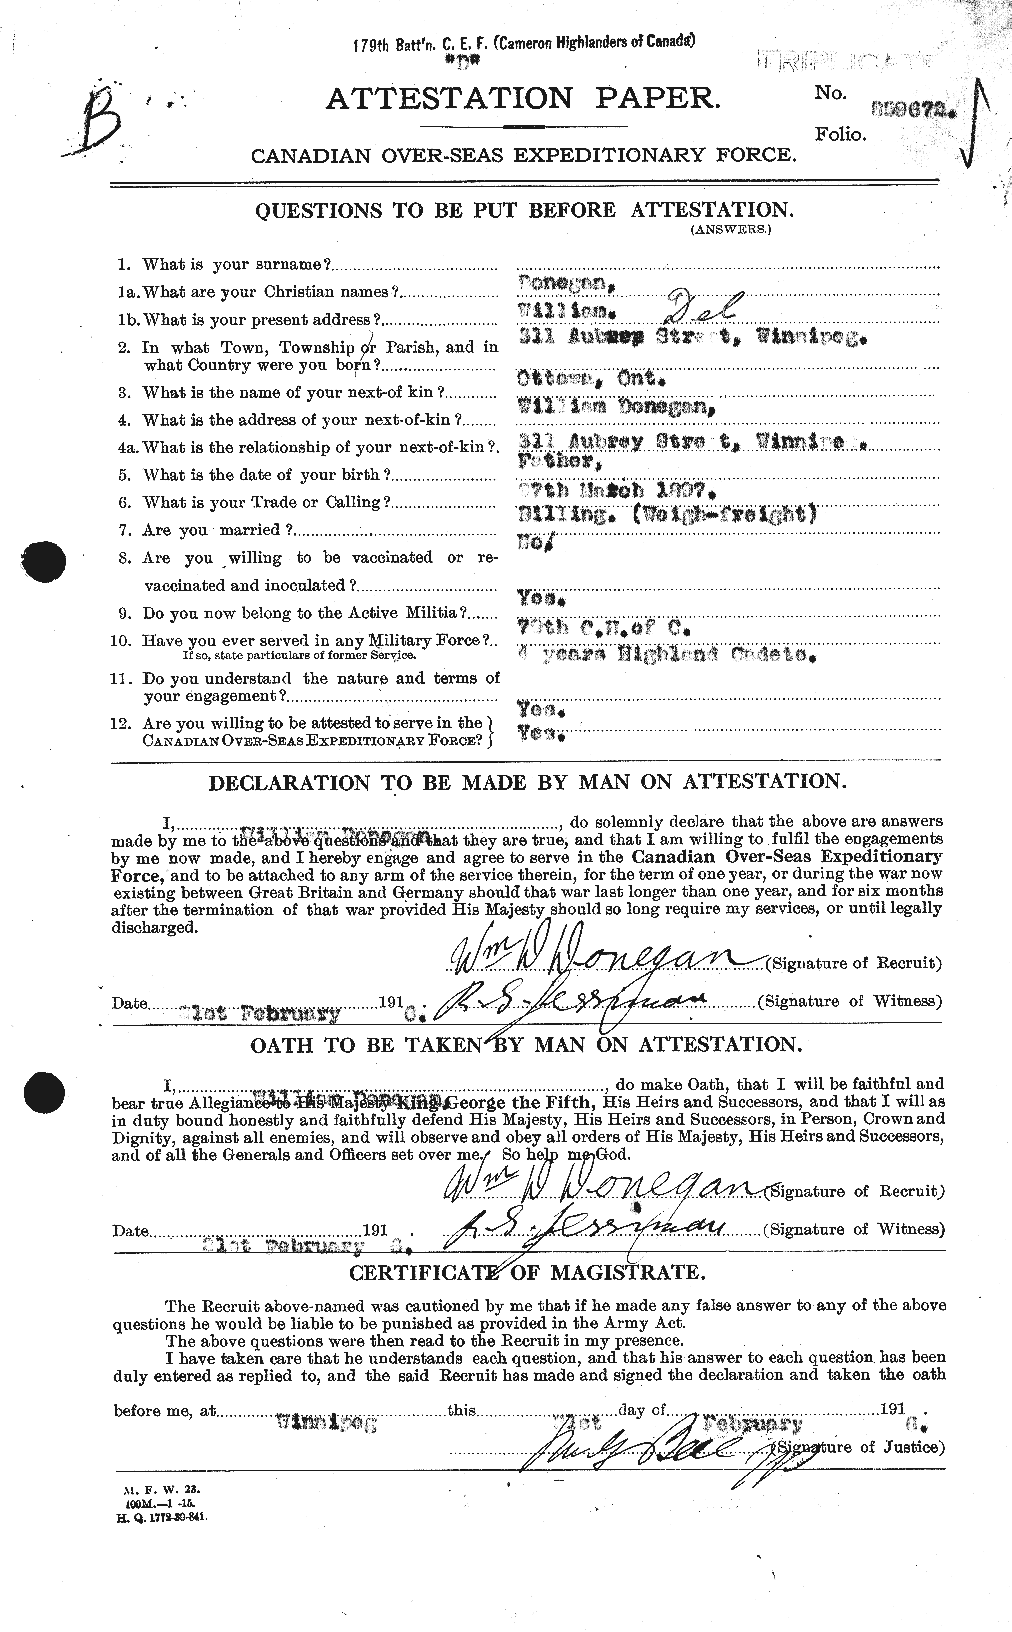 Personnel Records of the First World War - CEF 294639a